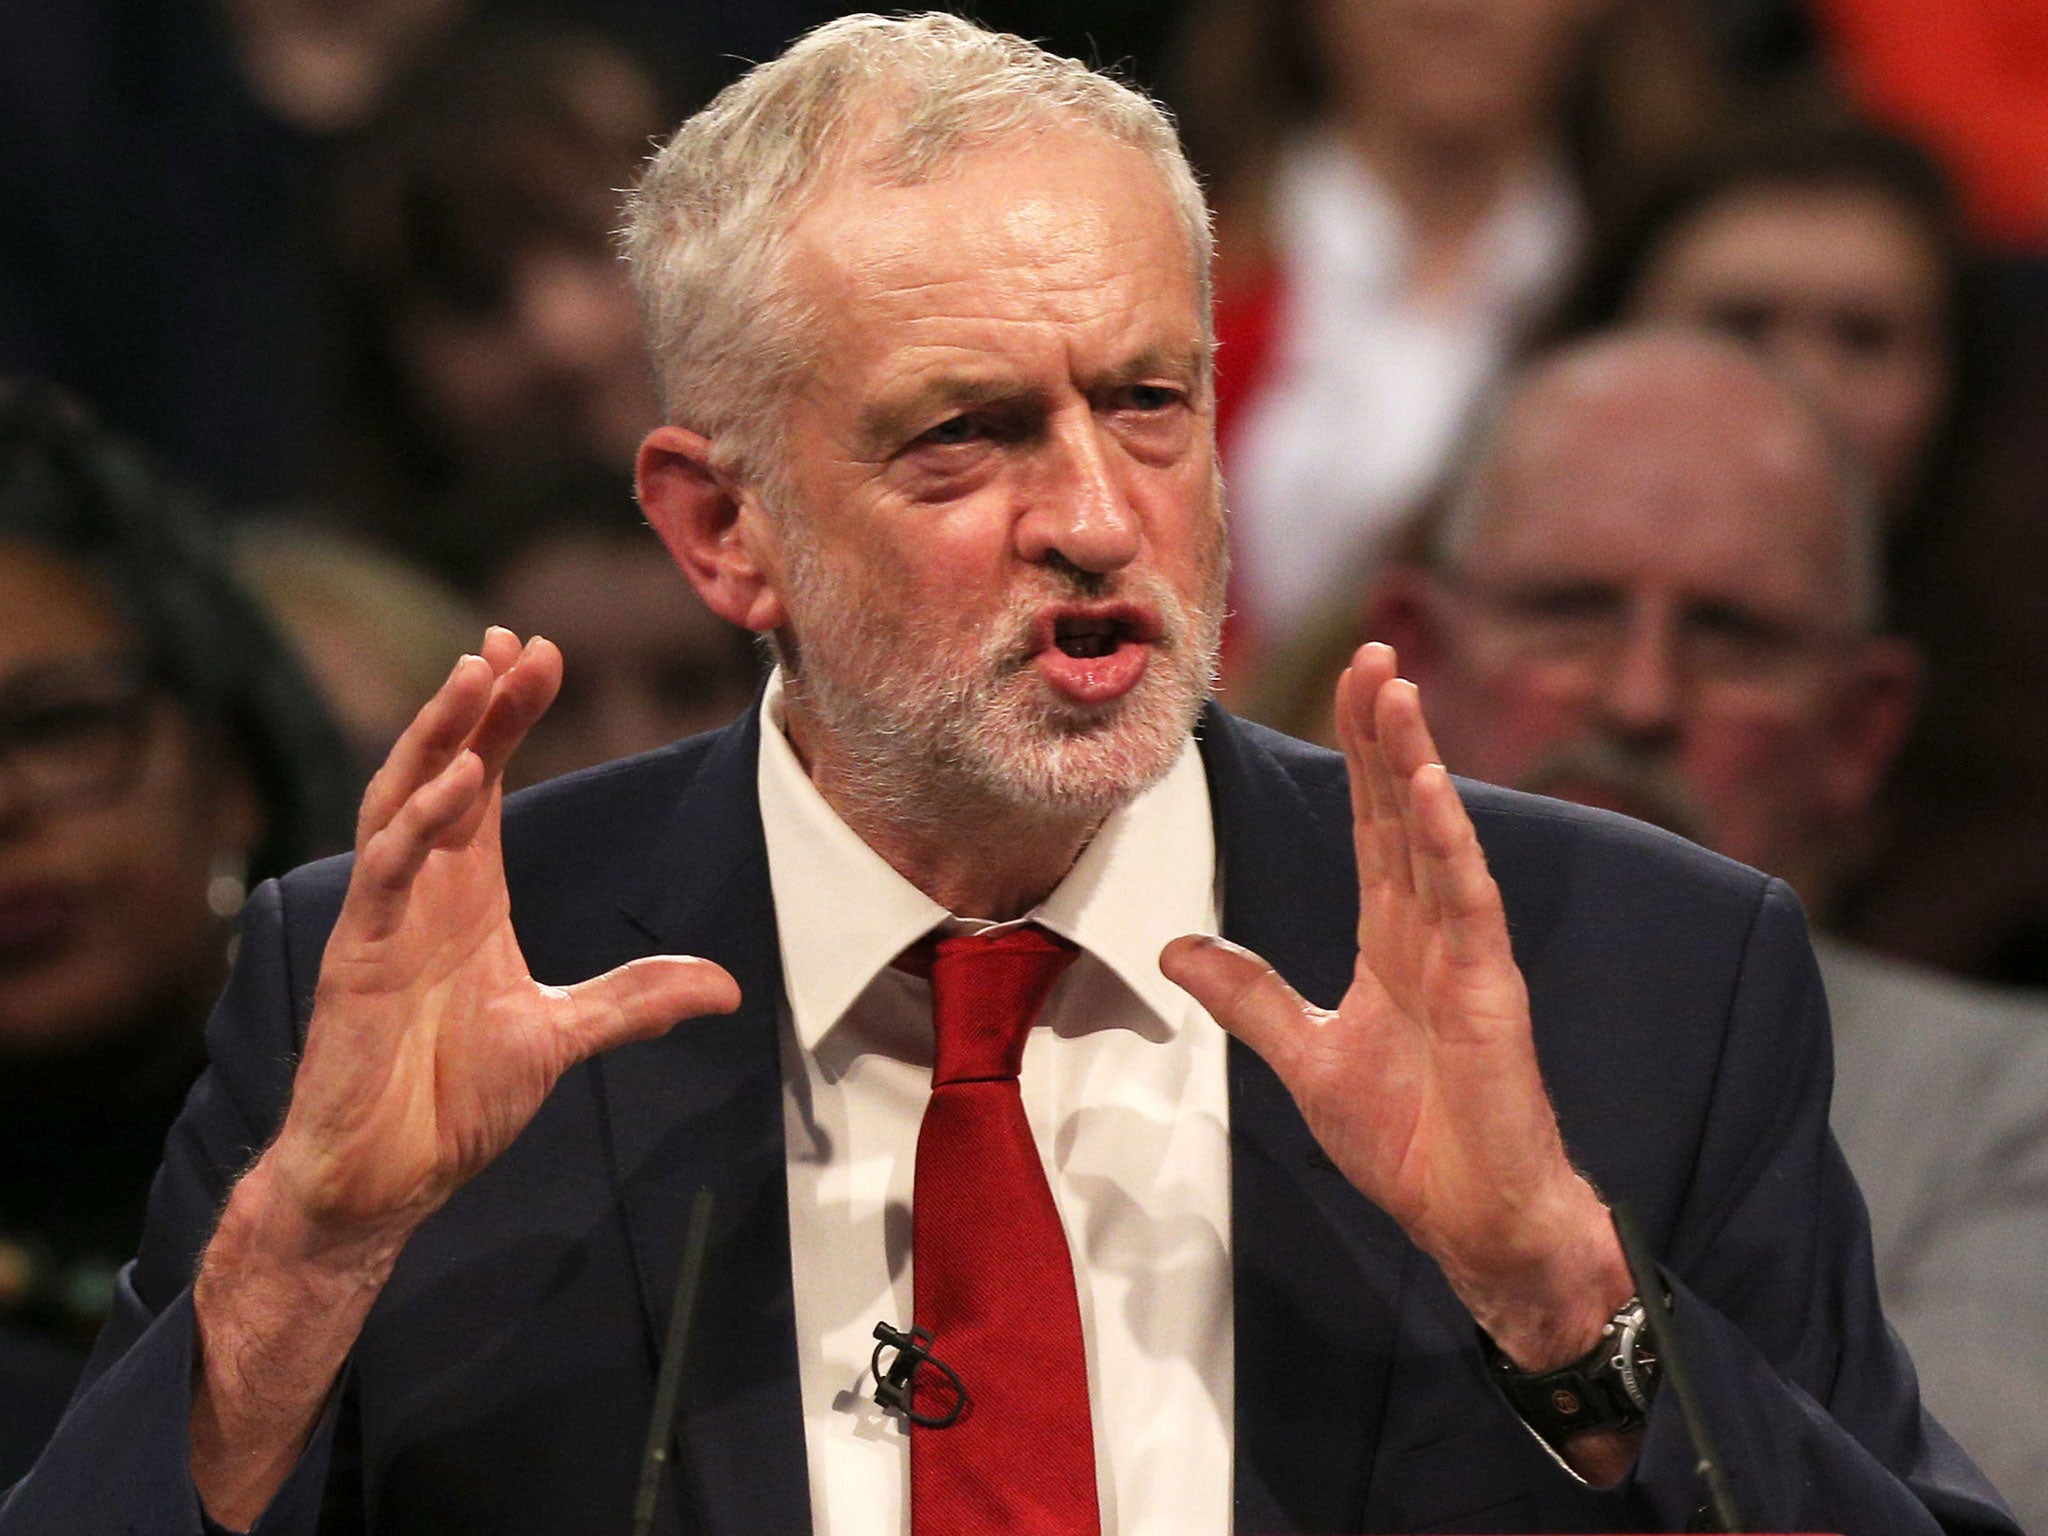 Jeremy Corbyn said Carillion's directors should not be paid at a time when the firm's collapse has put public services at risk